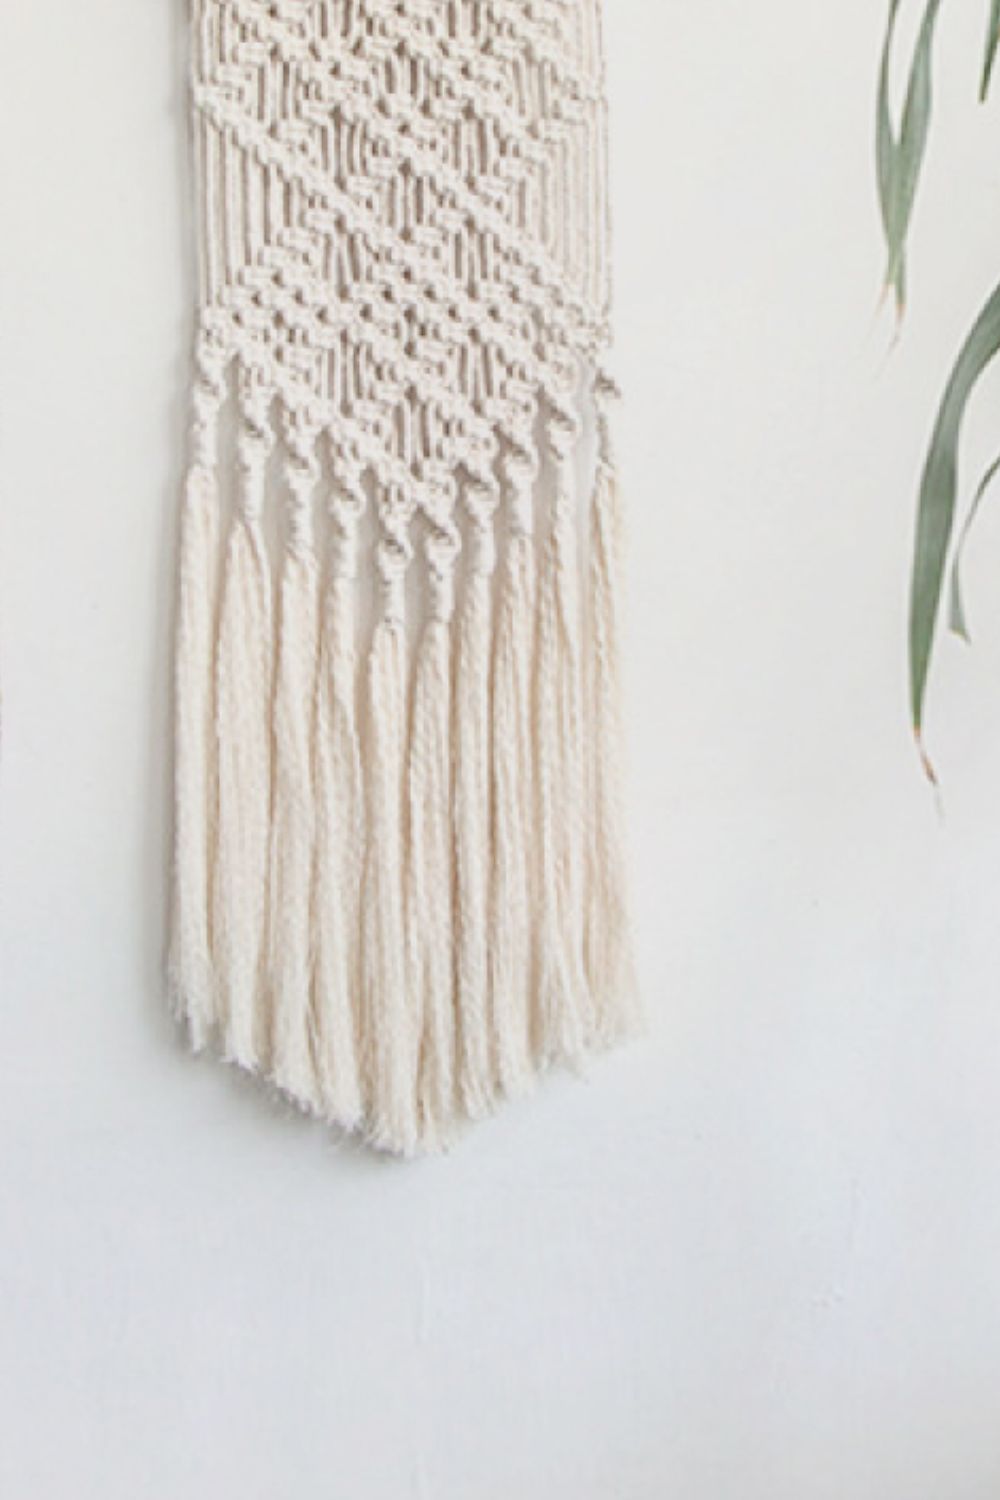 Macrame Fringe Wall Hanging available in multiple color options